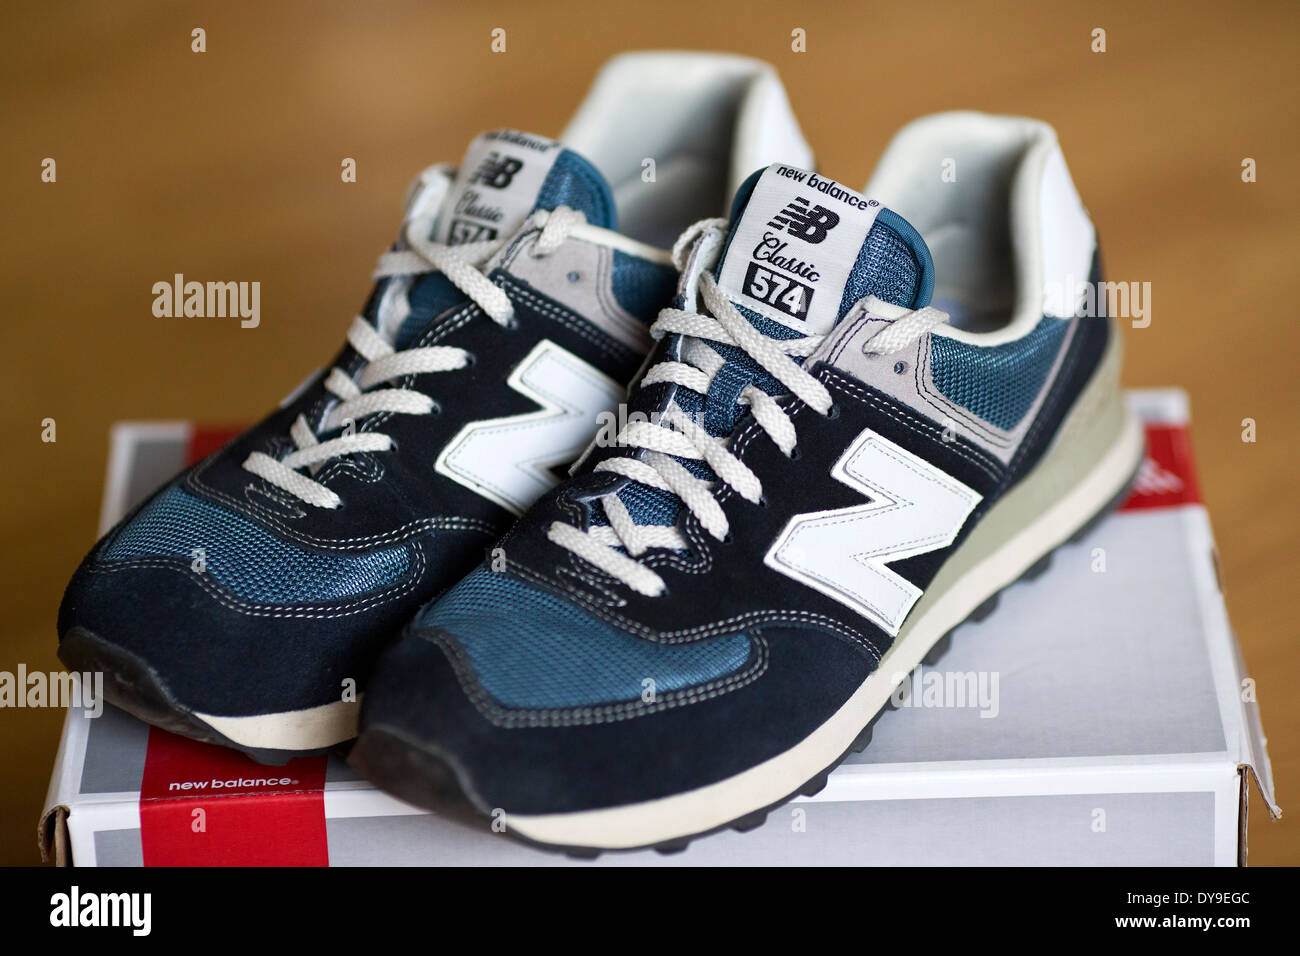 New Balance 530 | New Balance Shoes Outfit